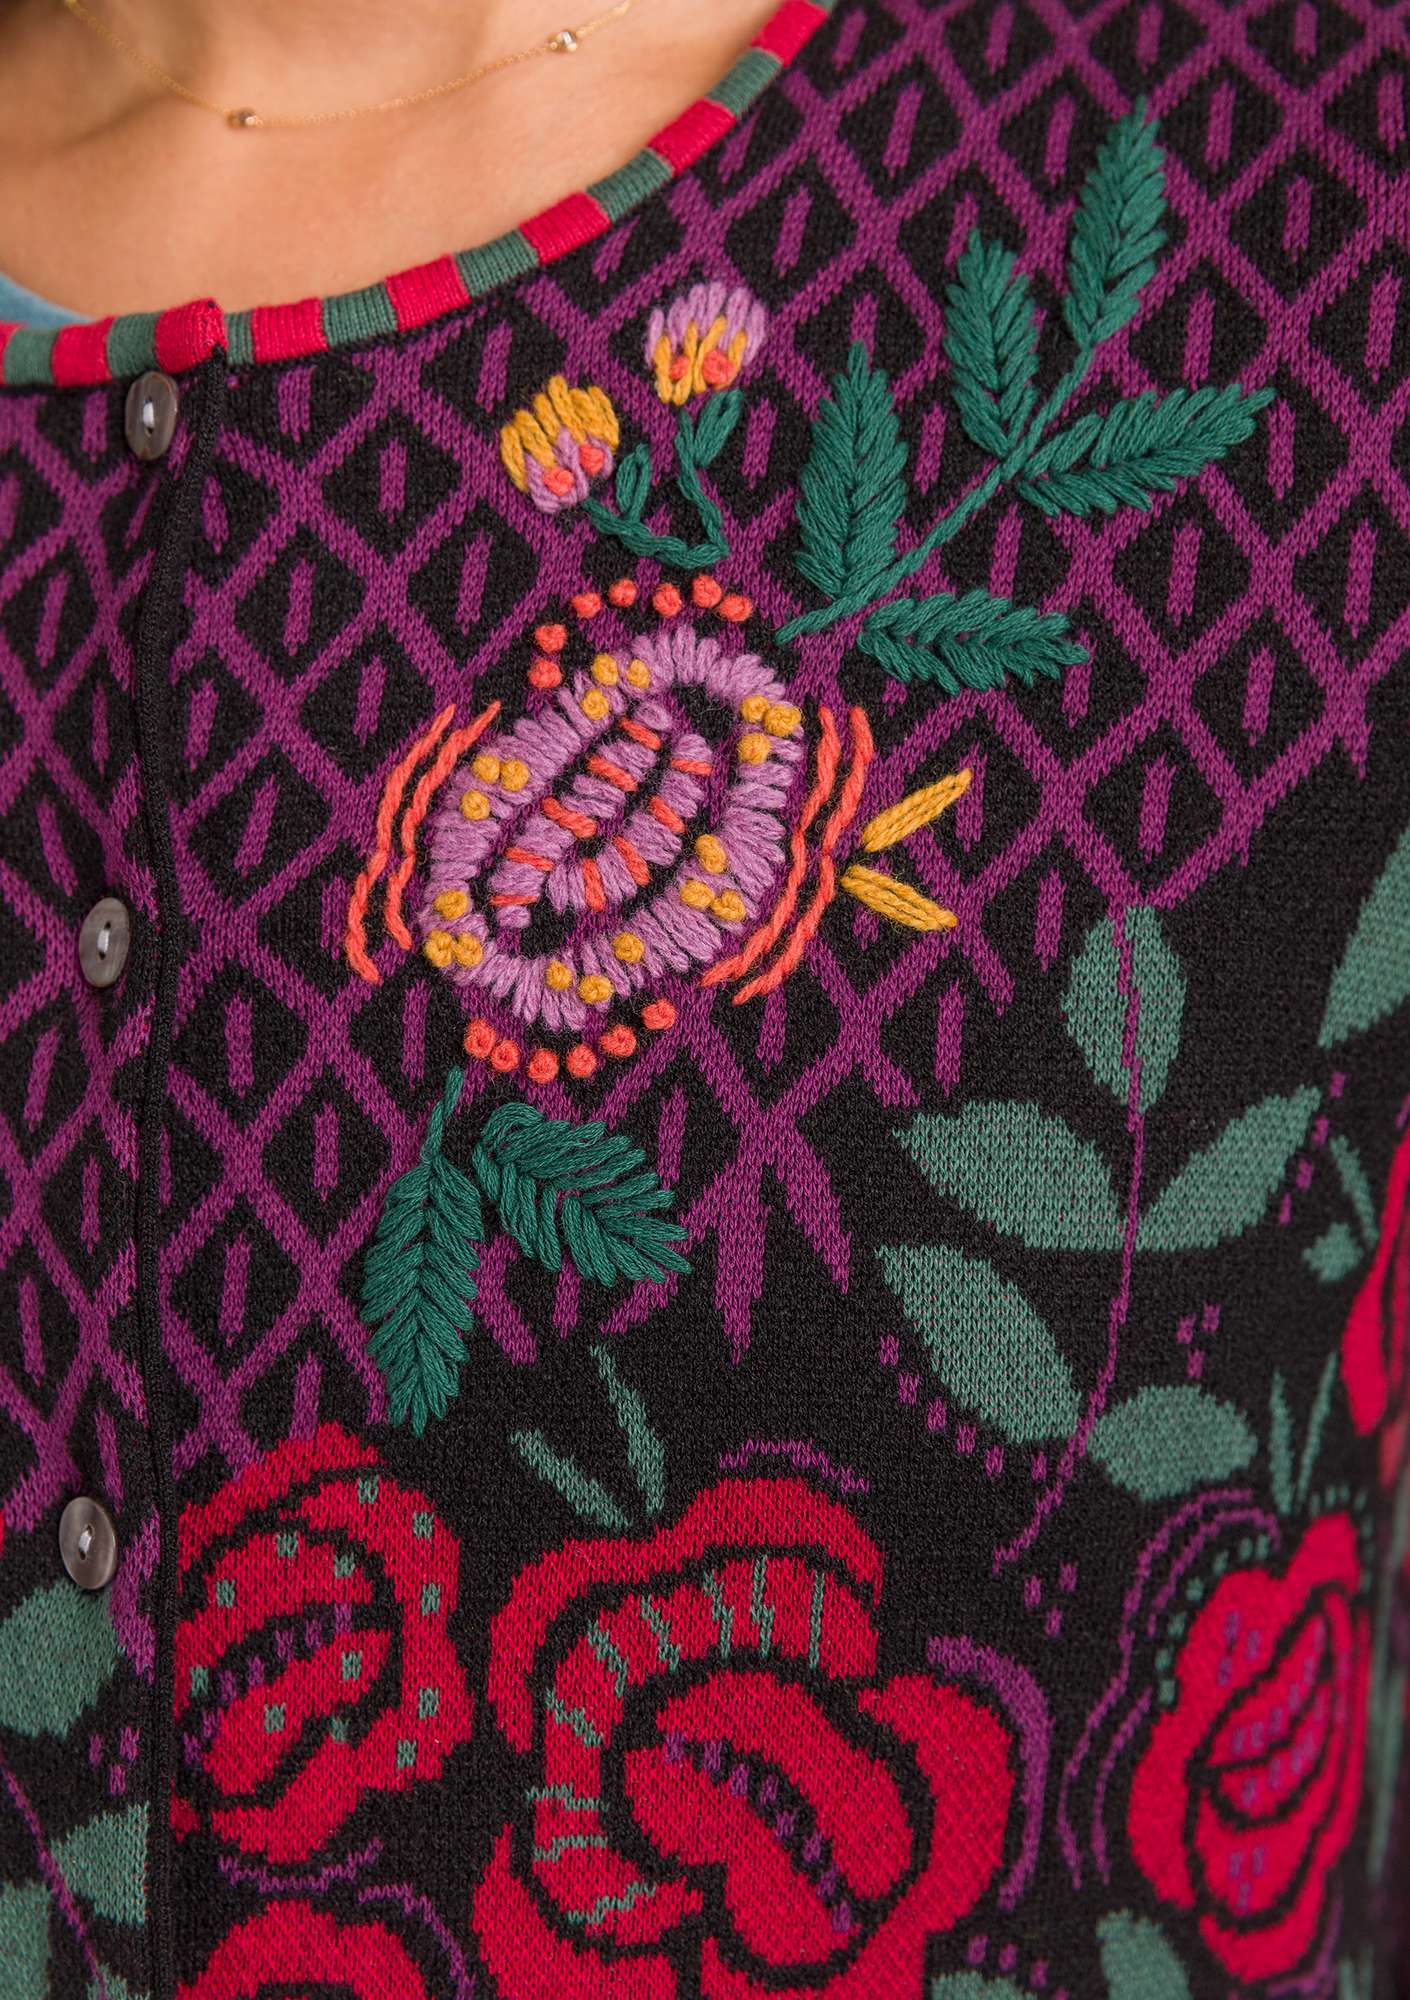 Hand-embroidered “China Rose” cardigan in wool/organic cotton black